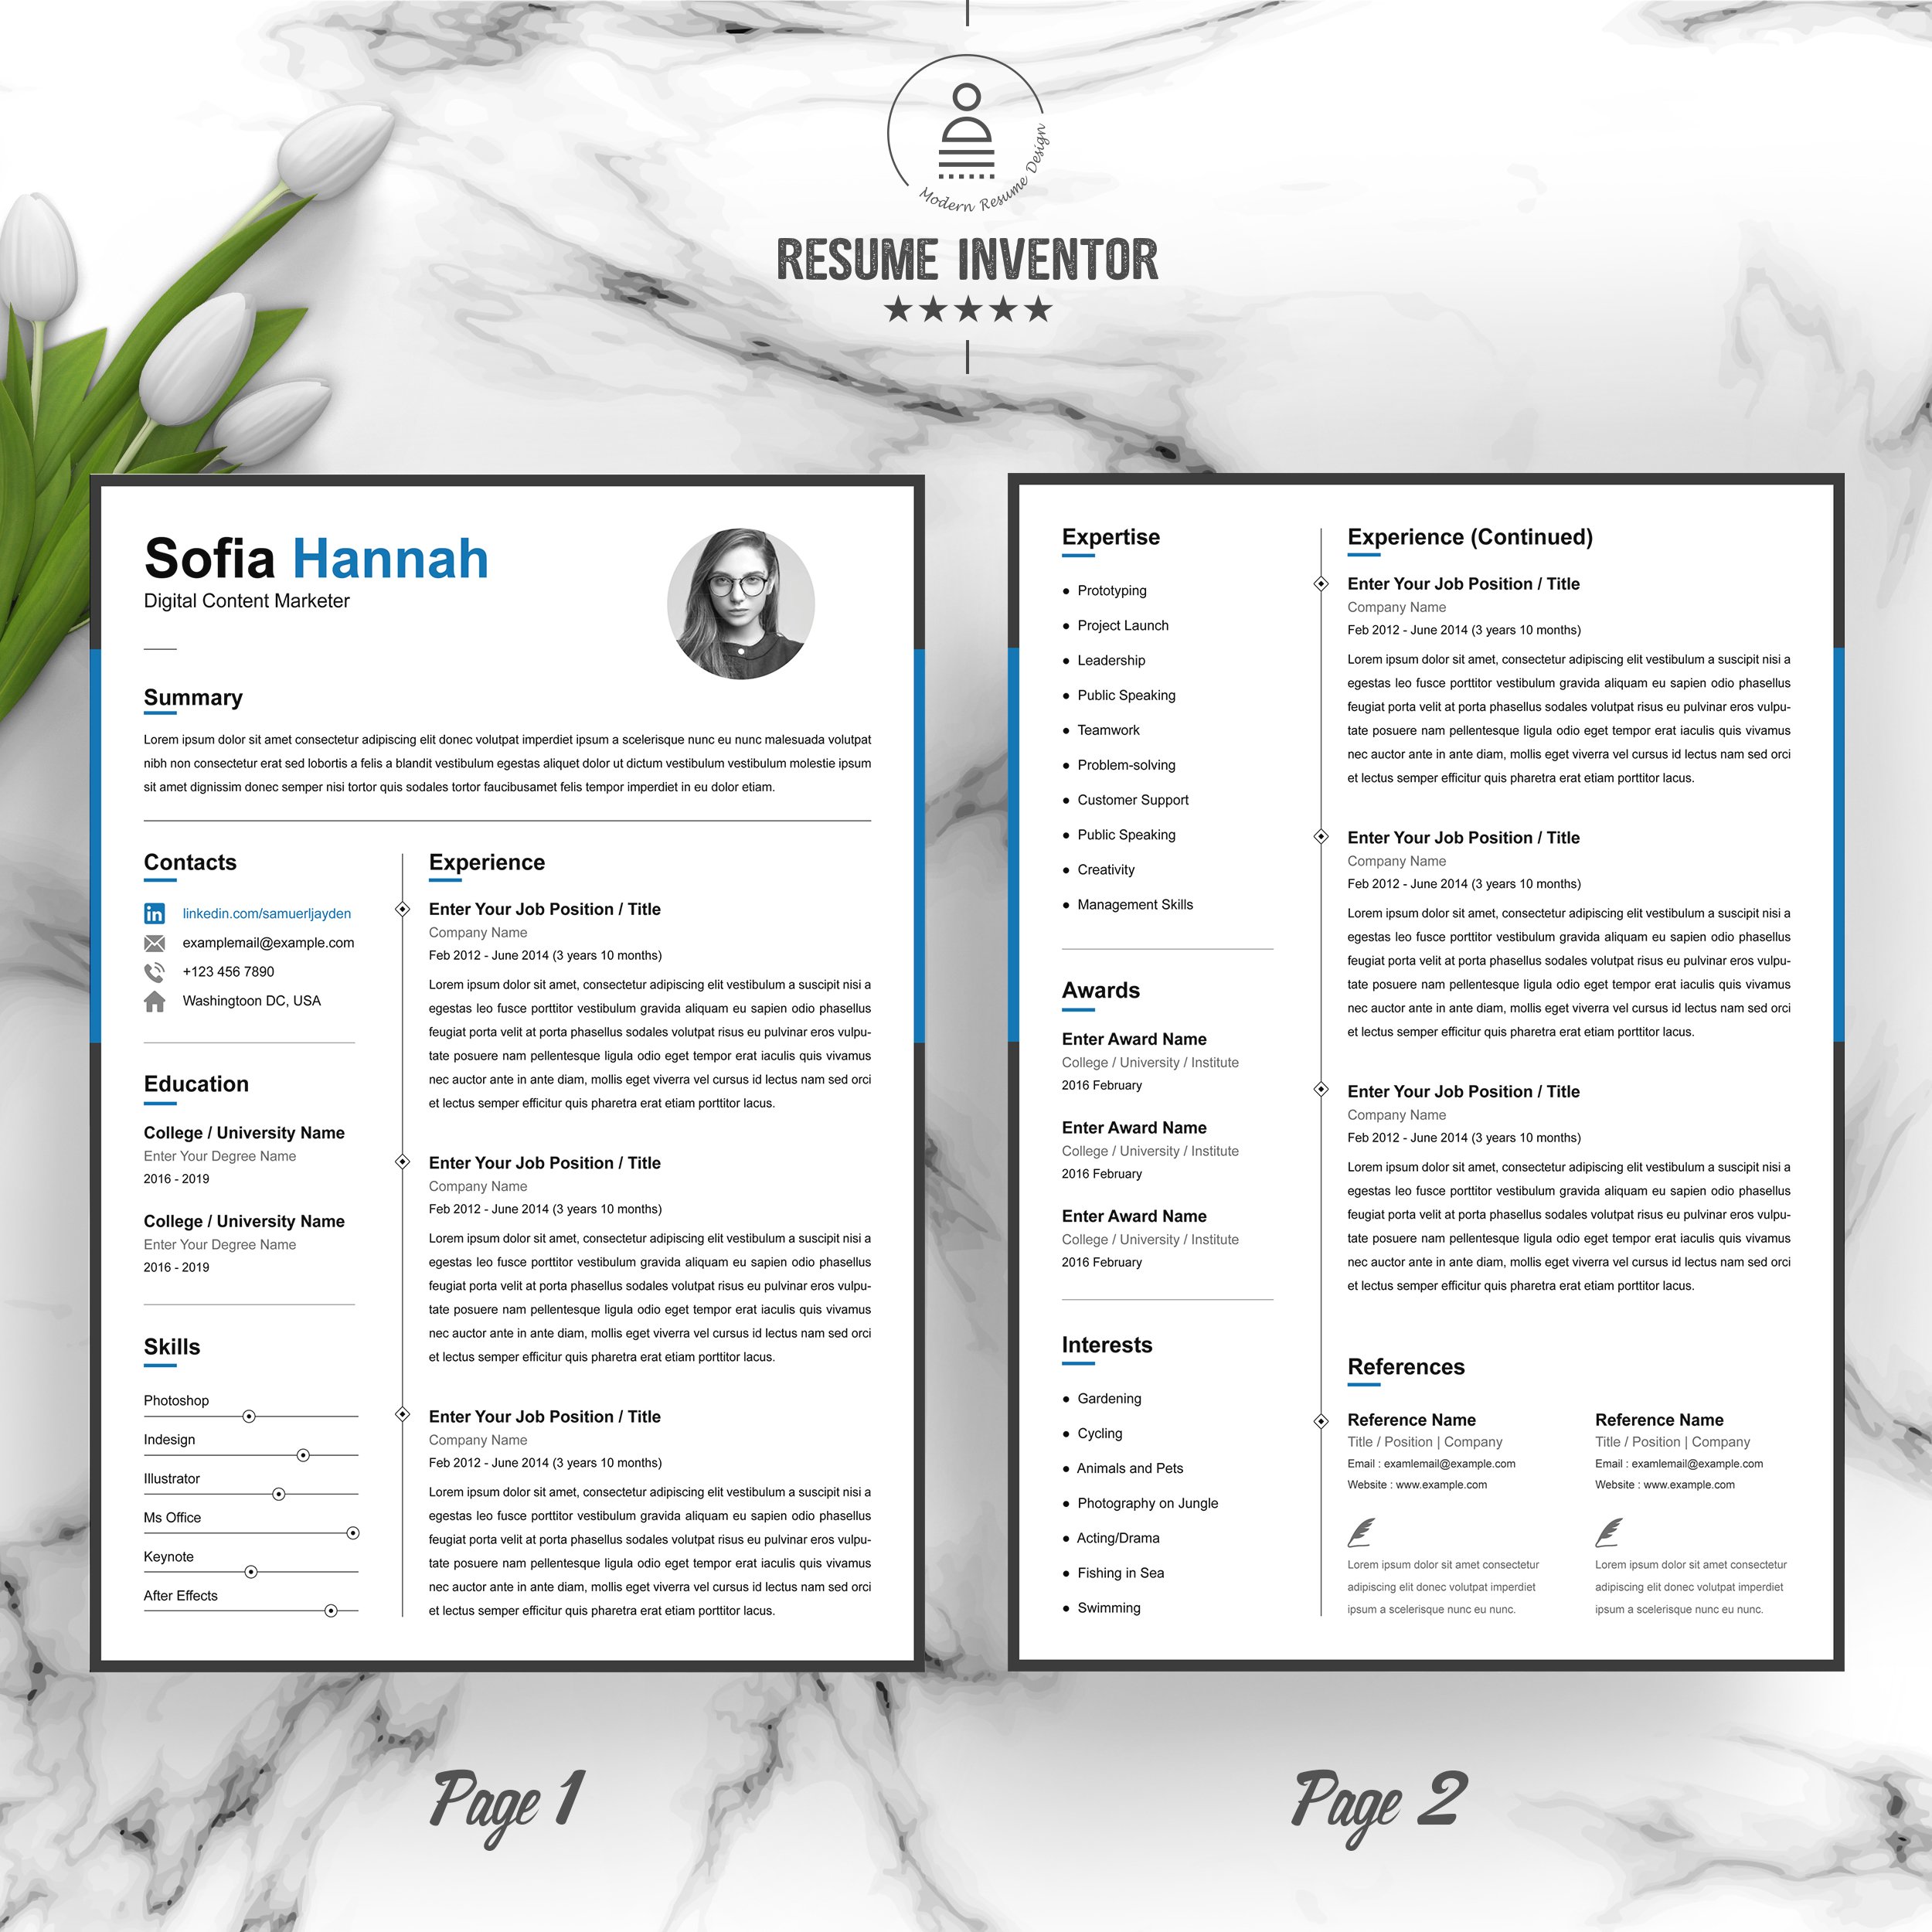 Digital Content Marketer Resume preview image.